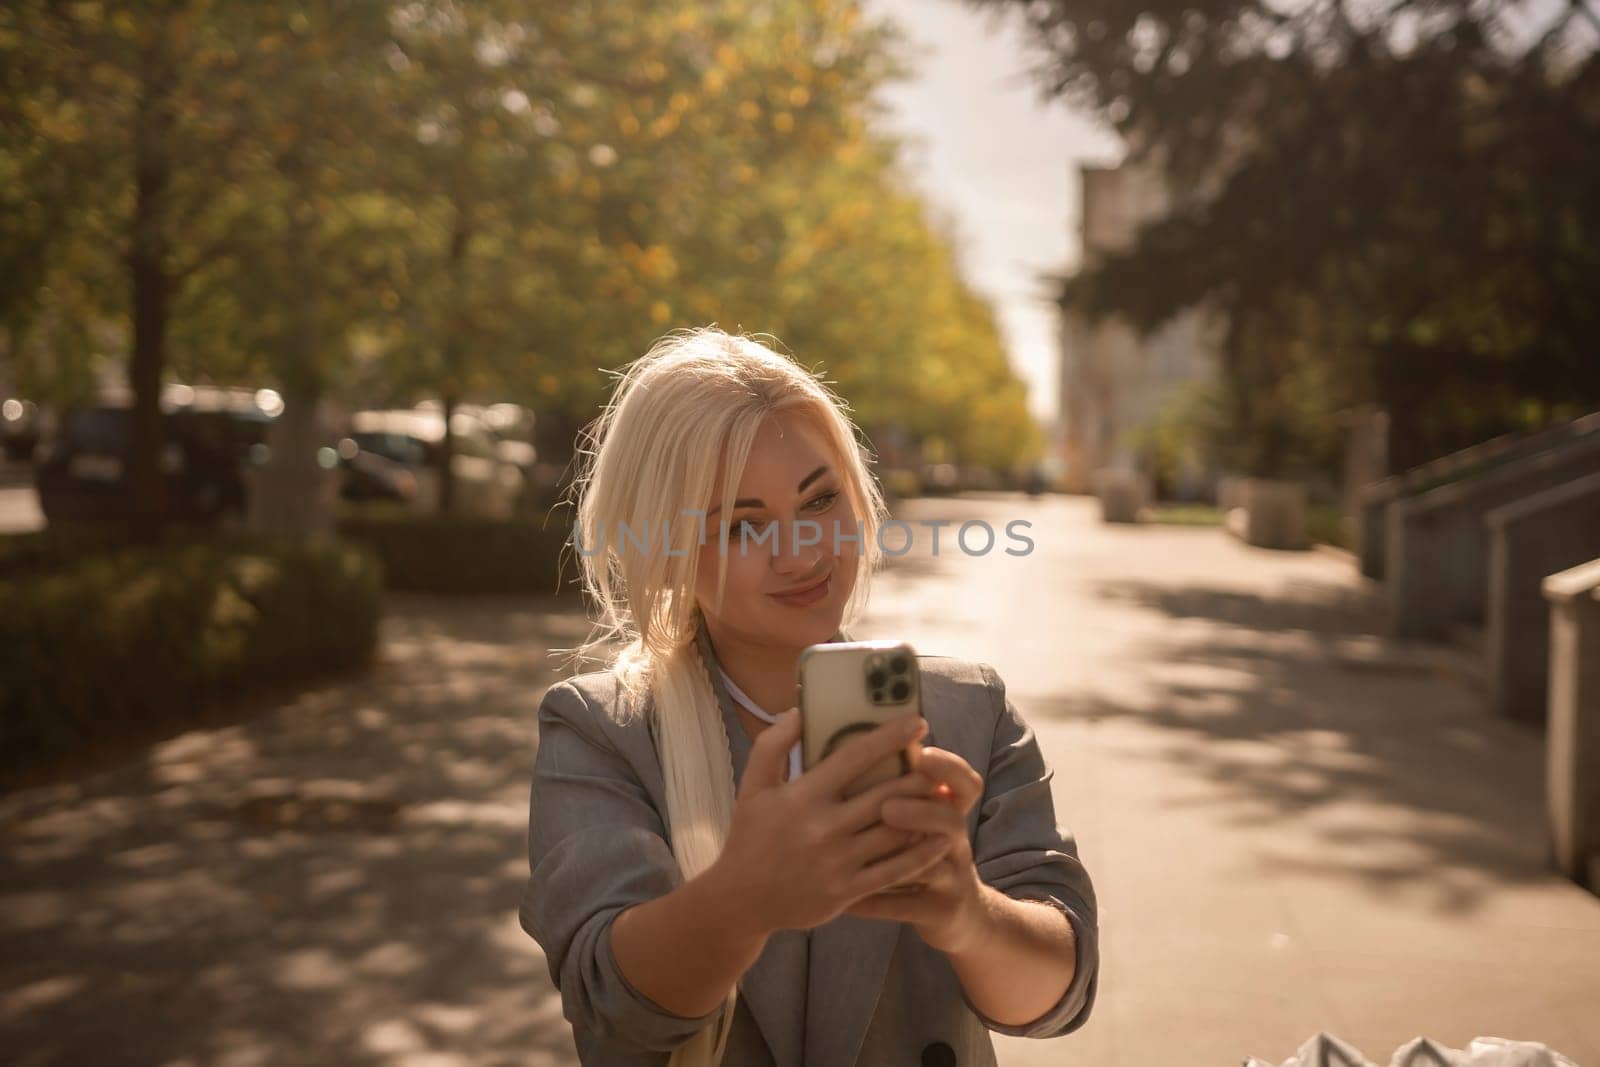 A woman is taking a picture of herself with her cell phone. She is wearing a gray jacket and scarf. The scene is set in a city with trees and cars in the background. by Matiunina